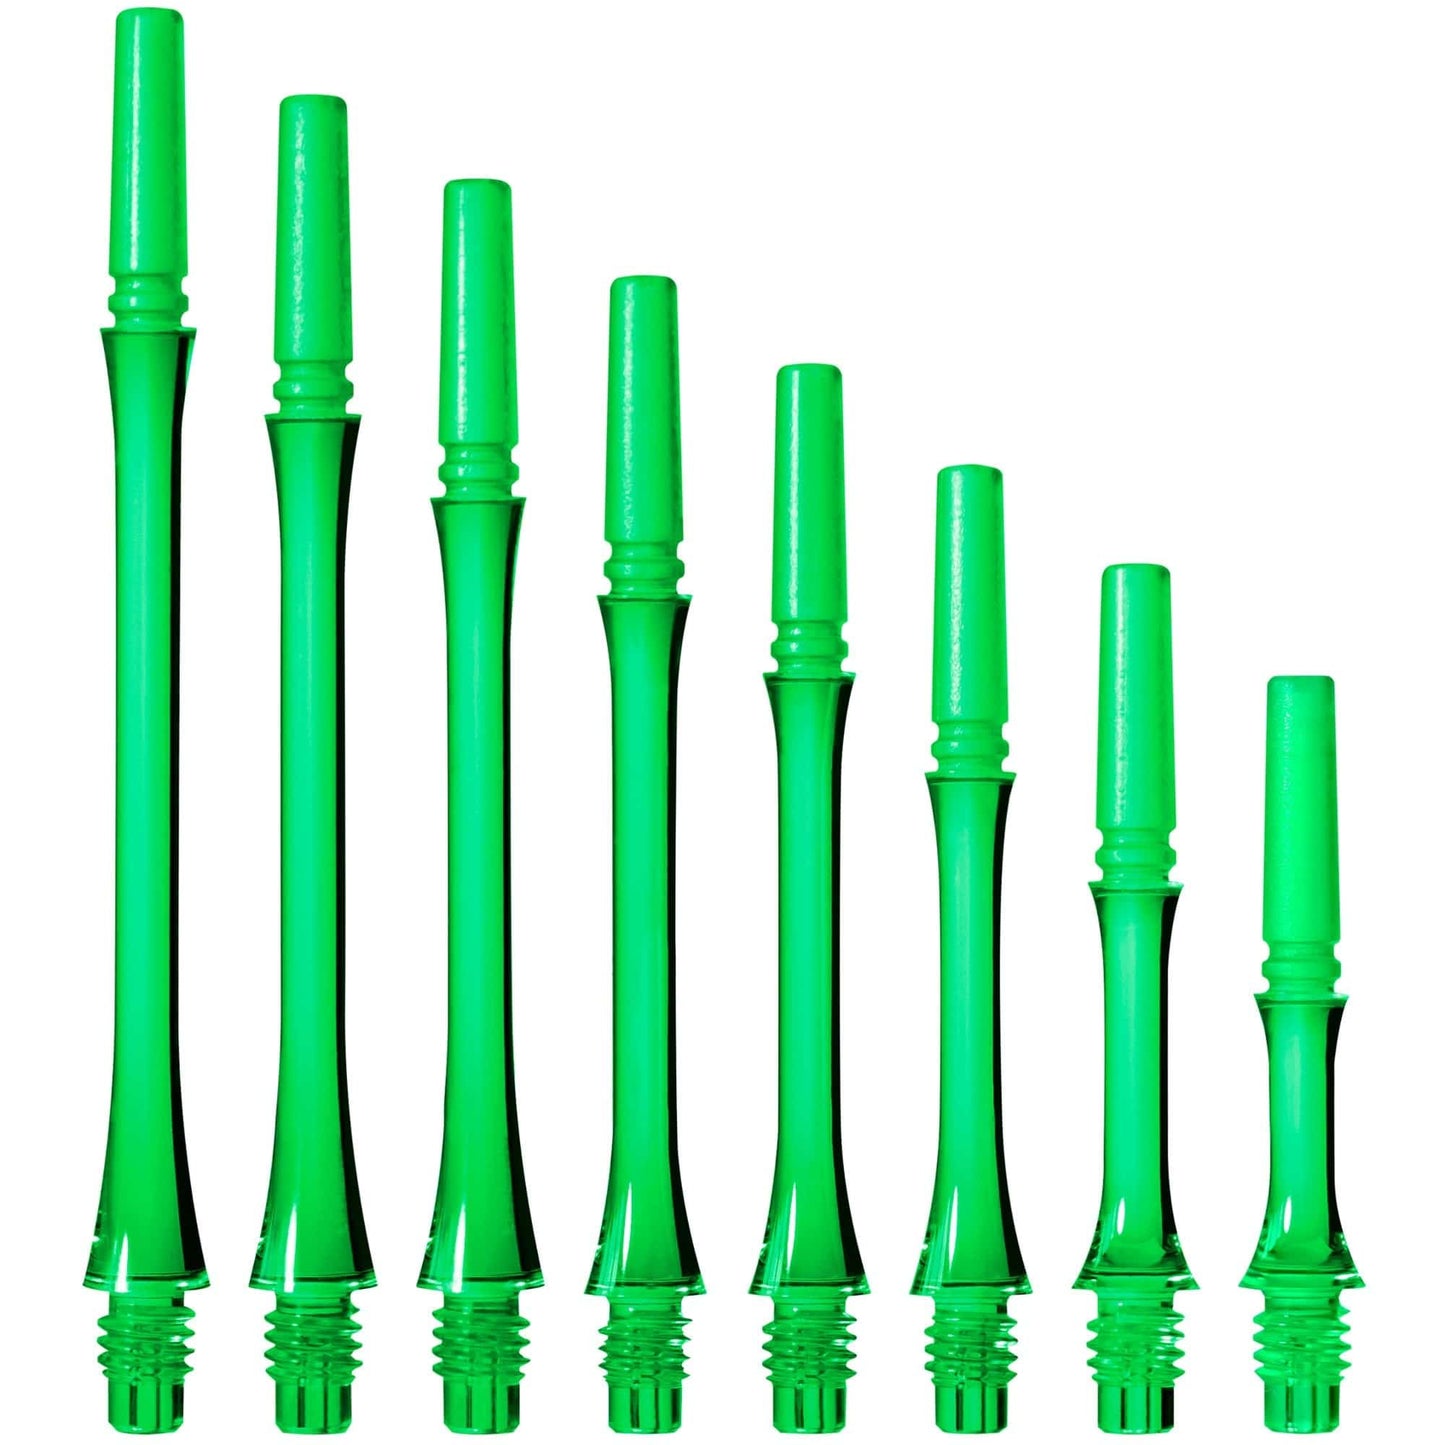 Cosmo Fit Shaft Gear - Locked - Slim - Clear Green Cosmo Size 1 - 13mm